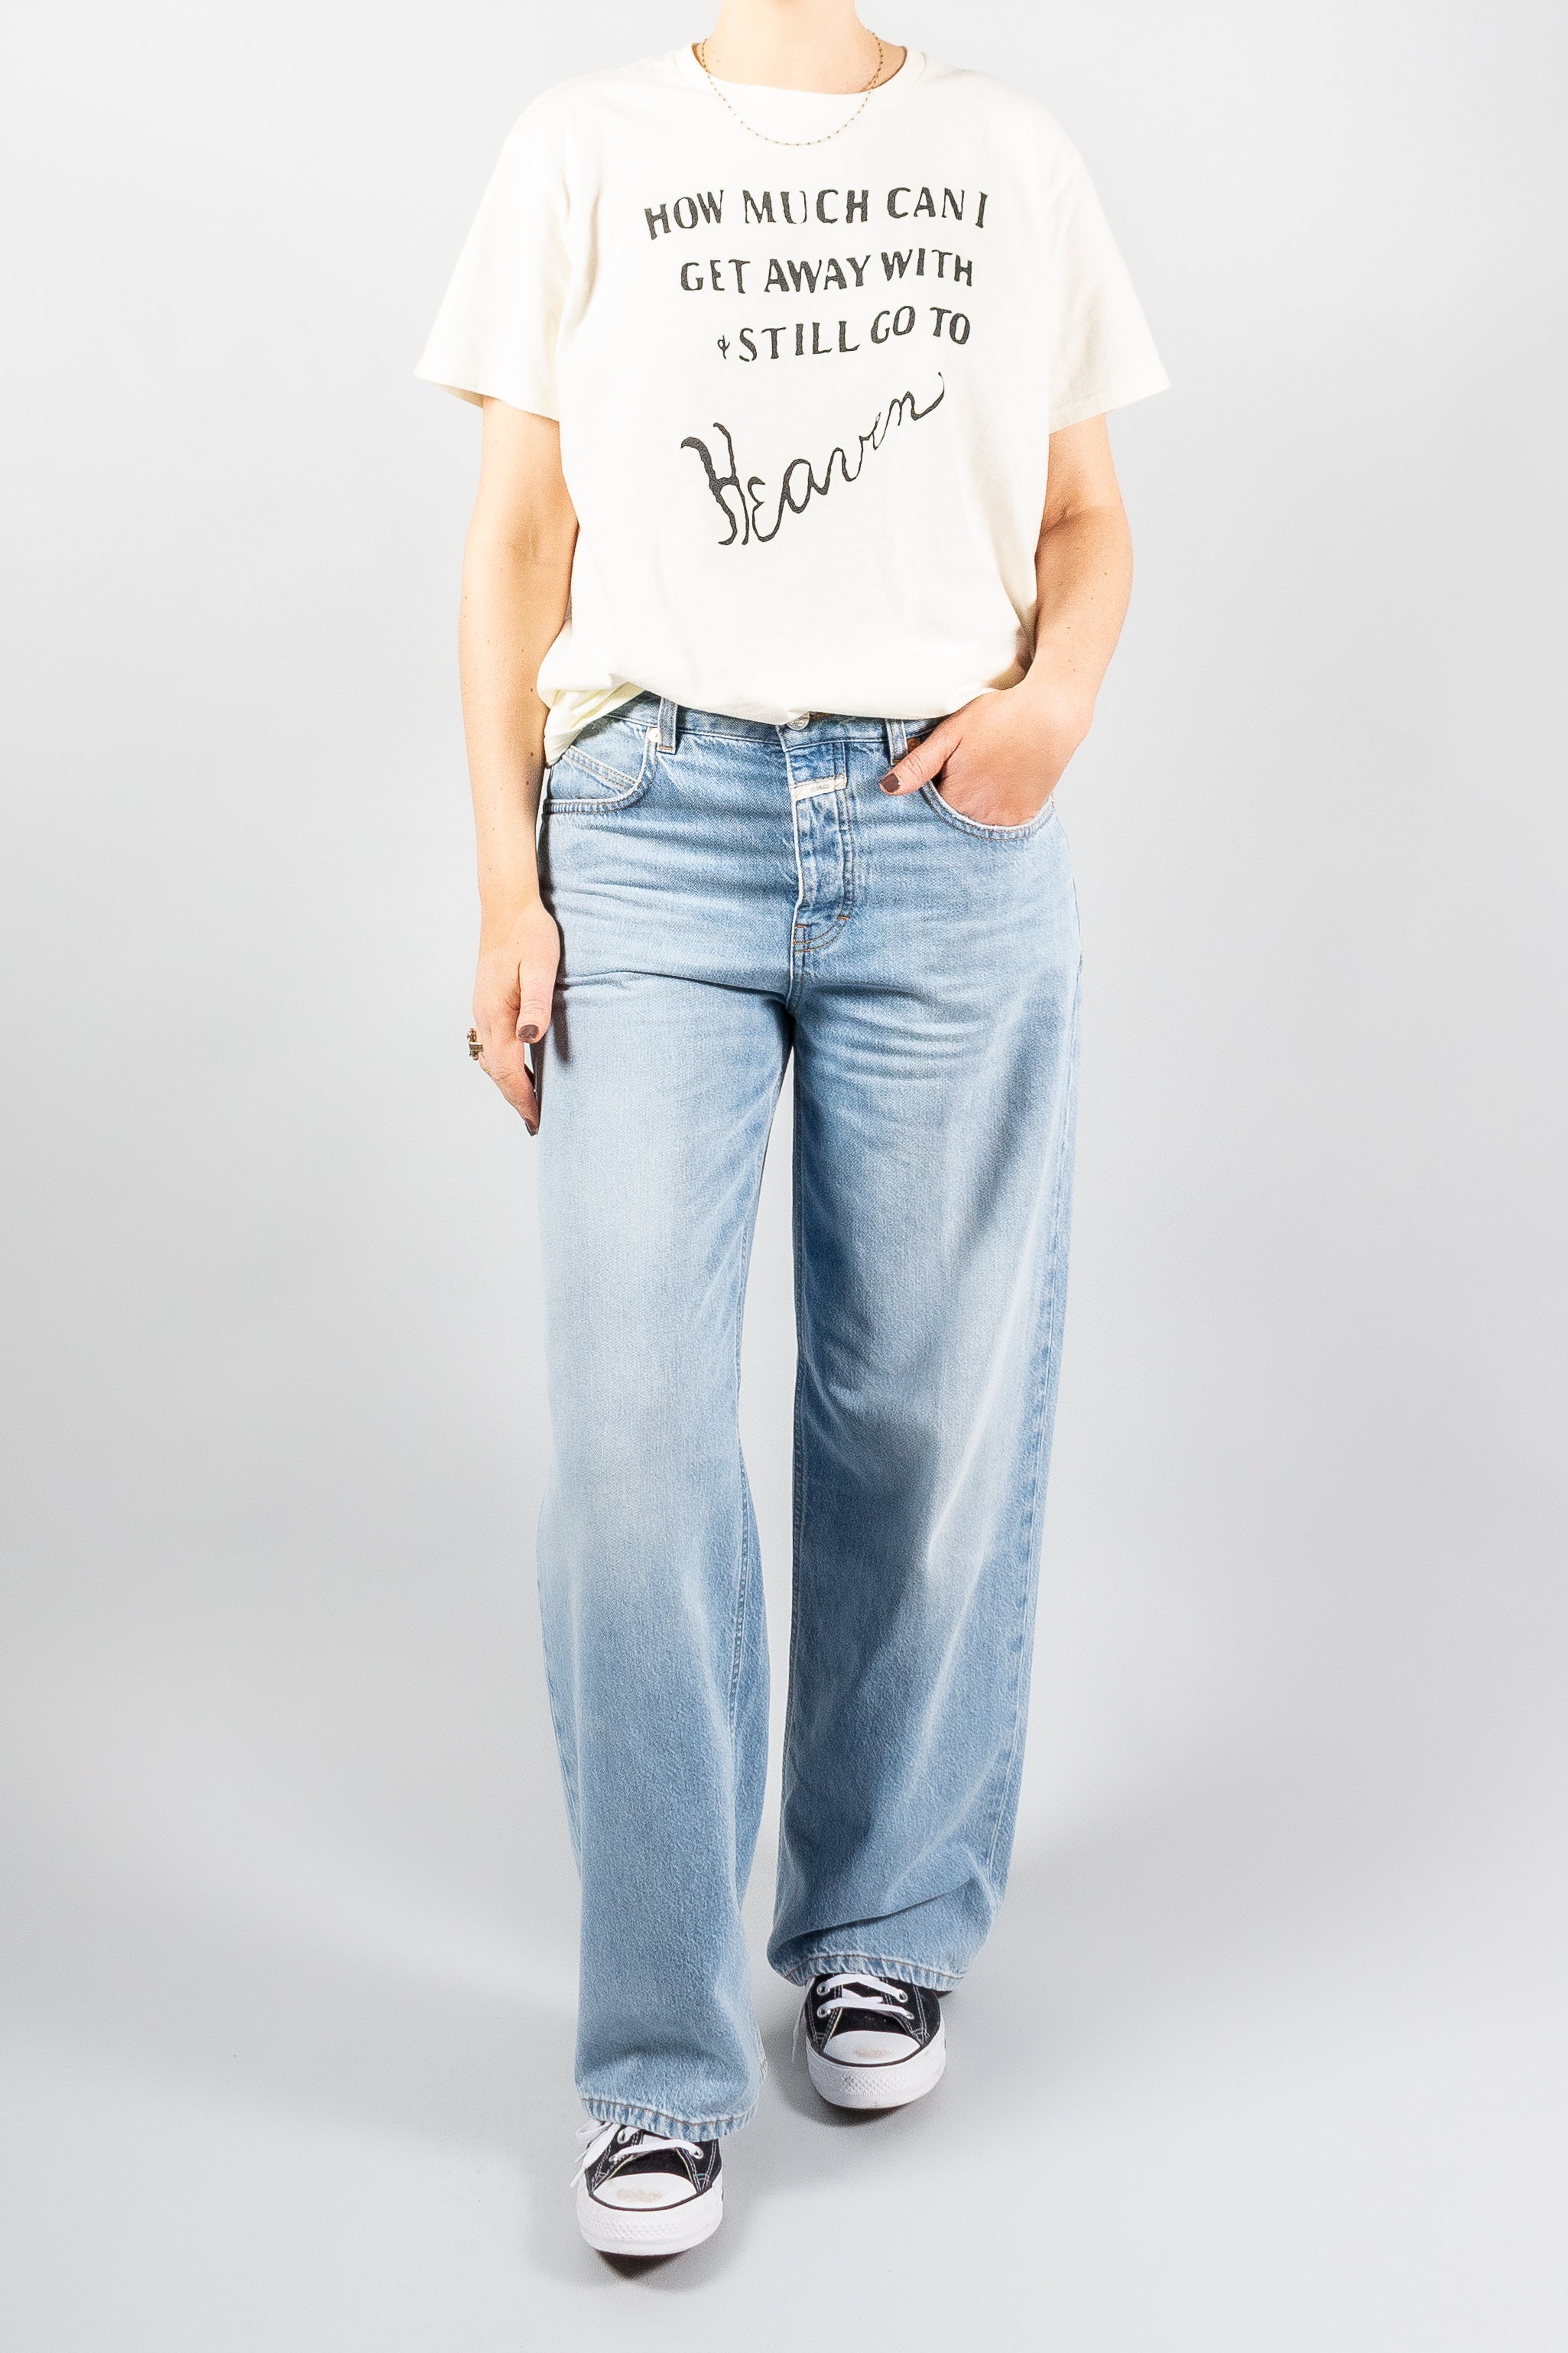 R13 Denim 'How Much Can I Get Away With' Boy T-Shirt